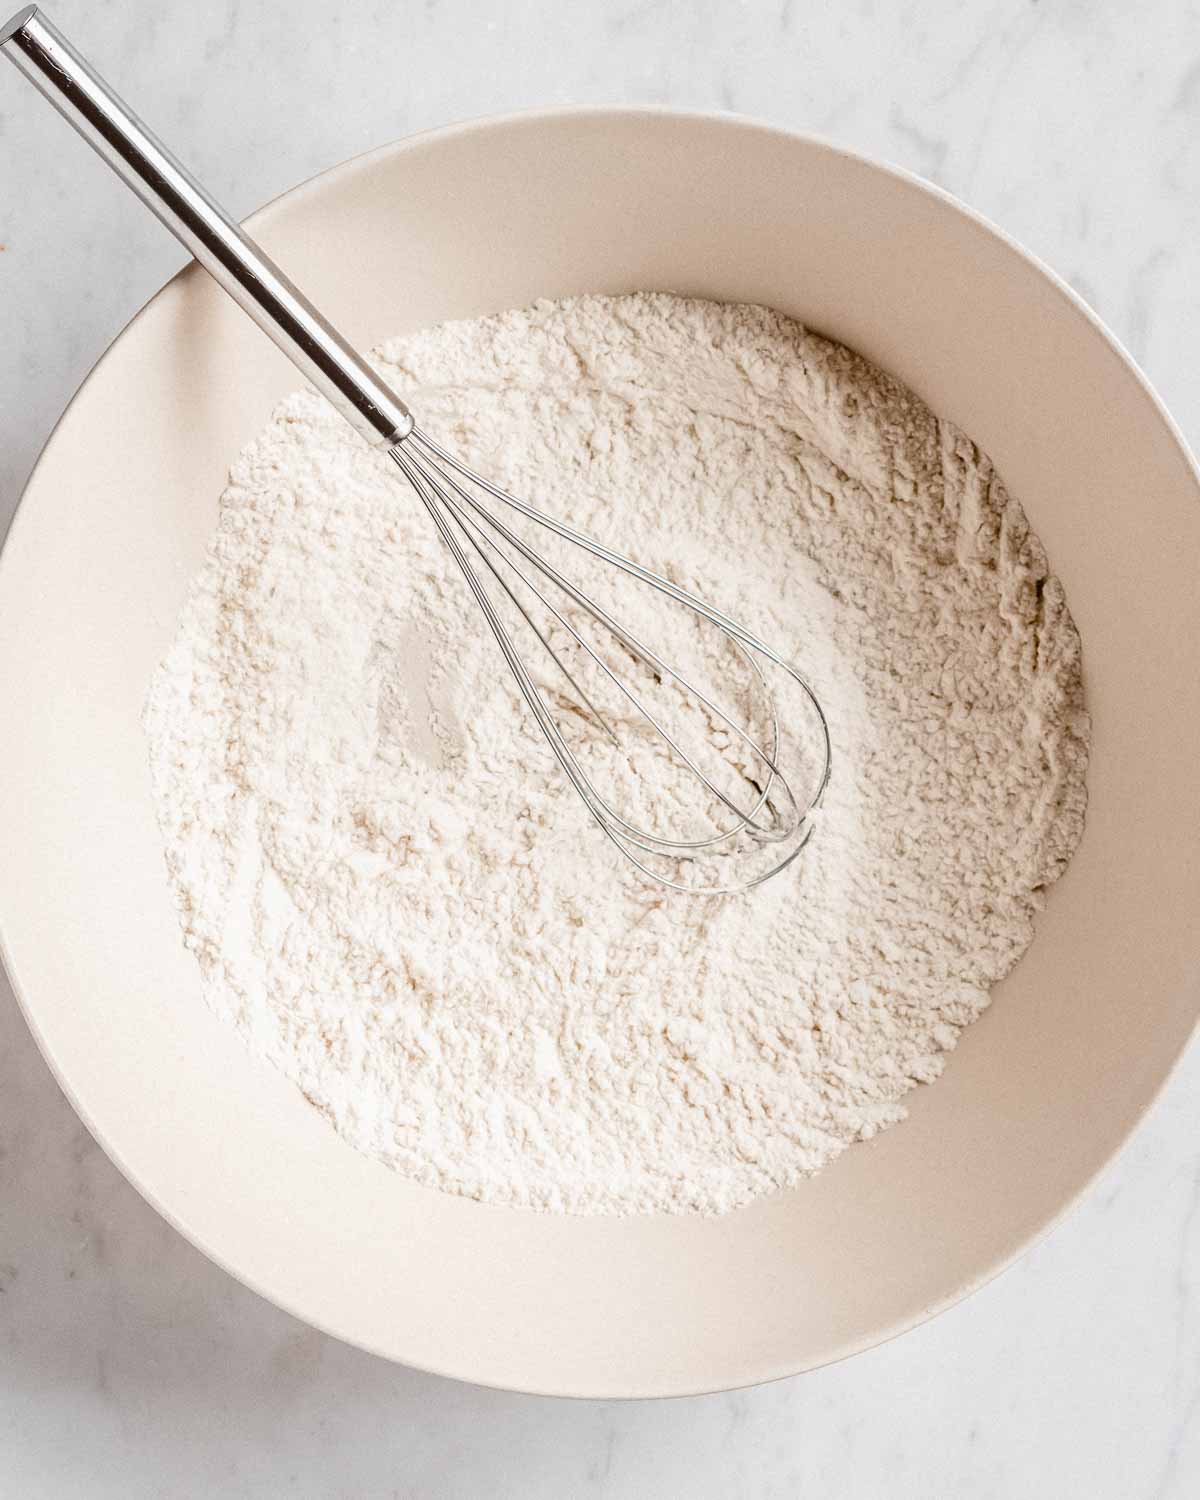 flour and salt whisked together in a large bowl.